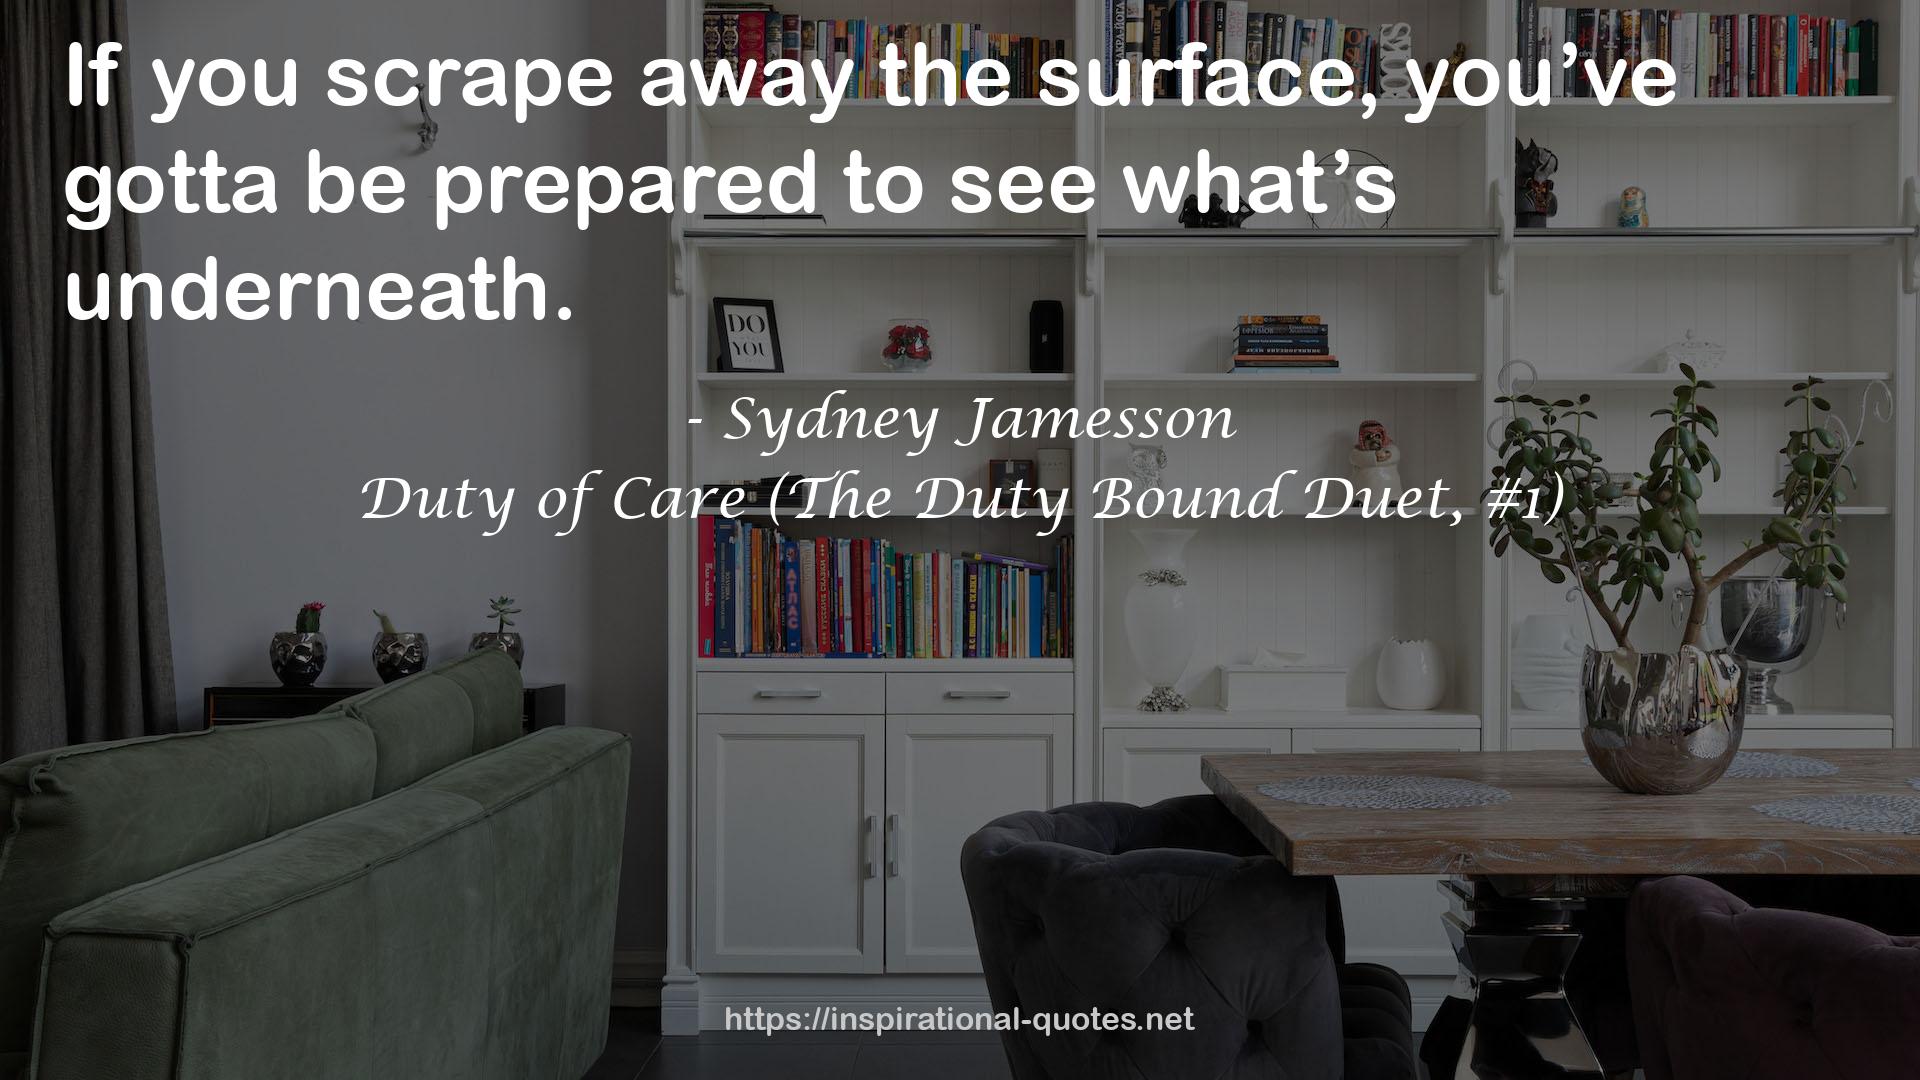 Duty of Care (The Duty Bound Duet, #1) QUOTES